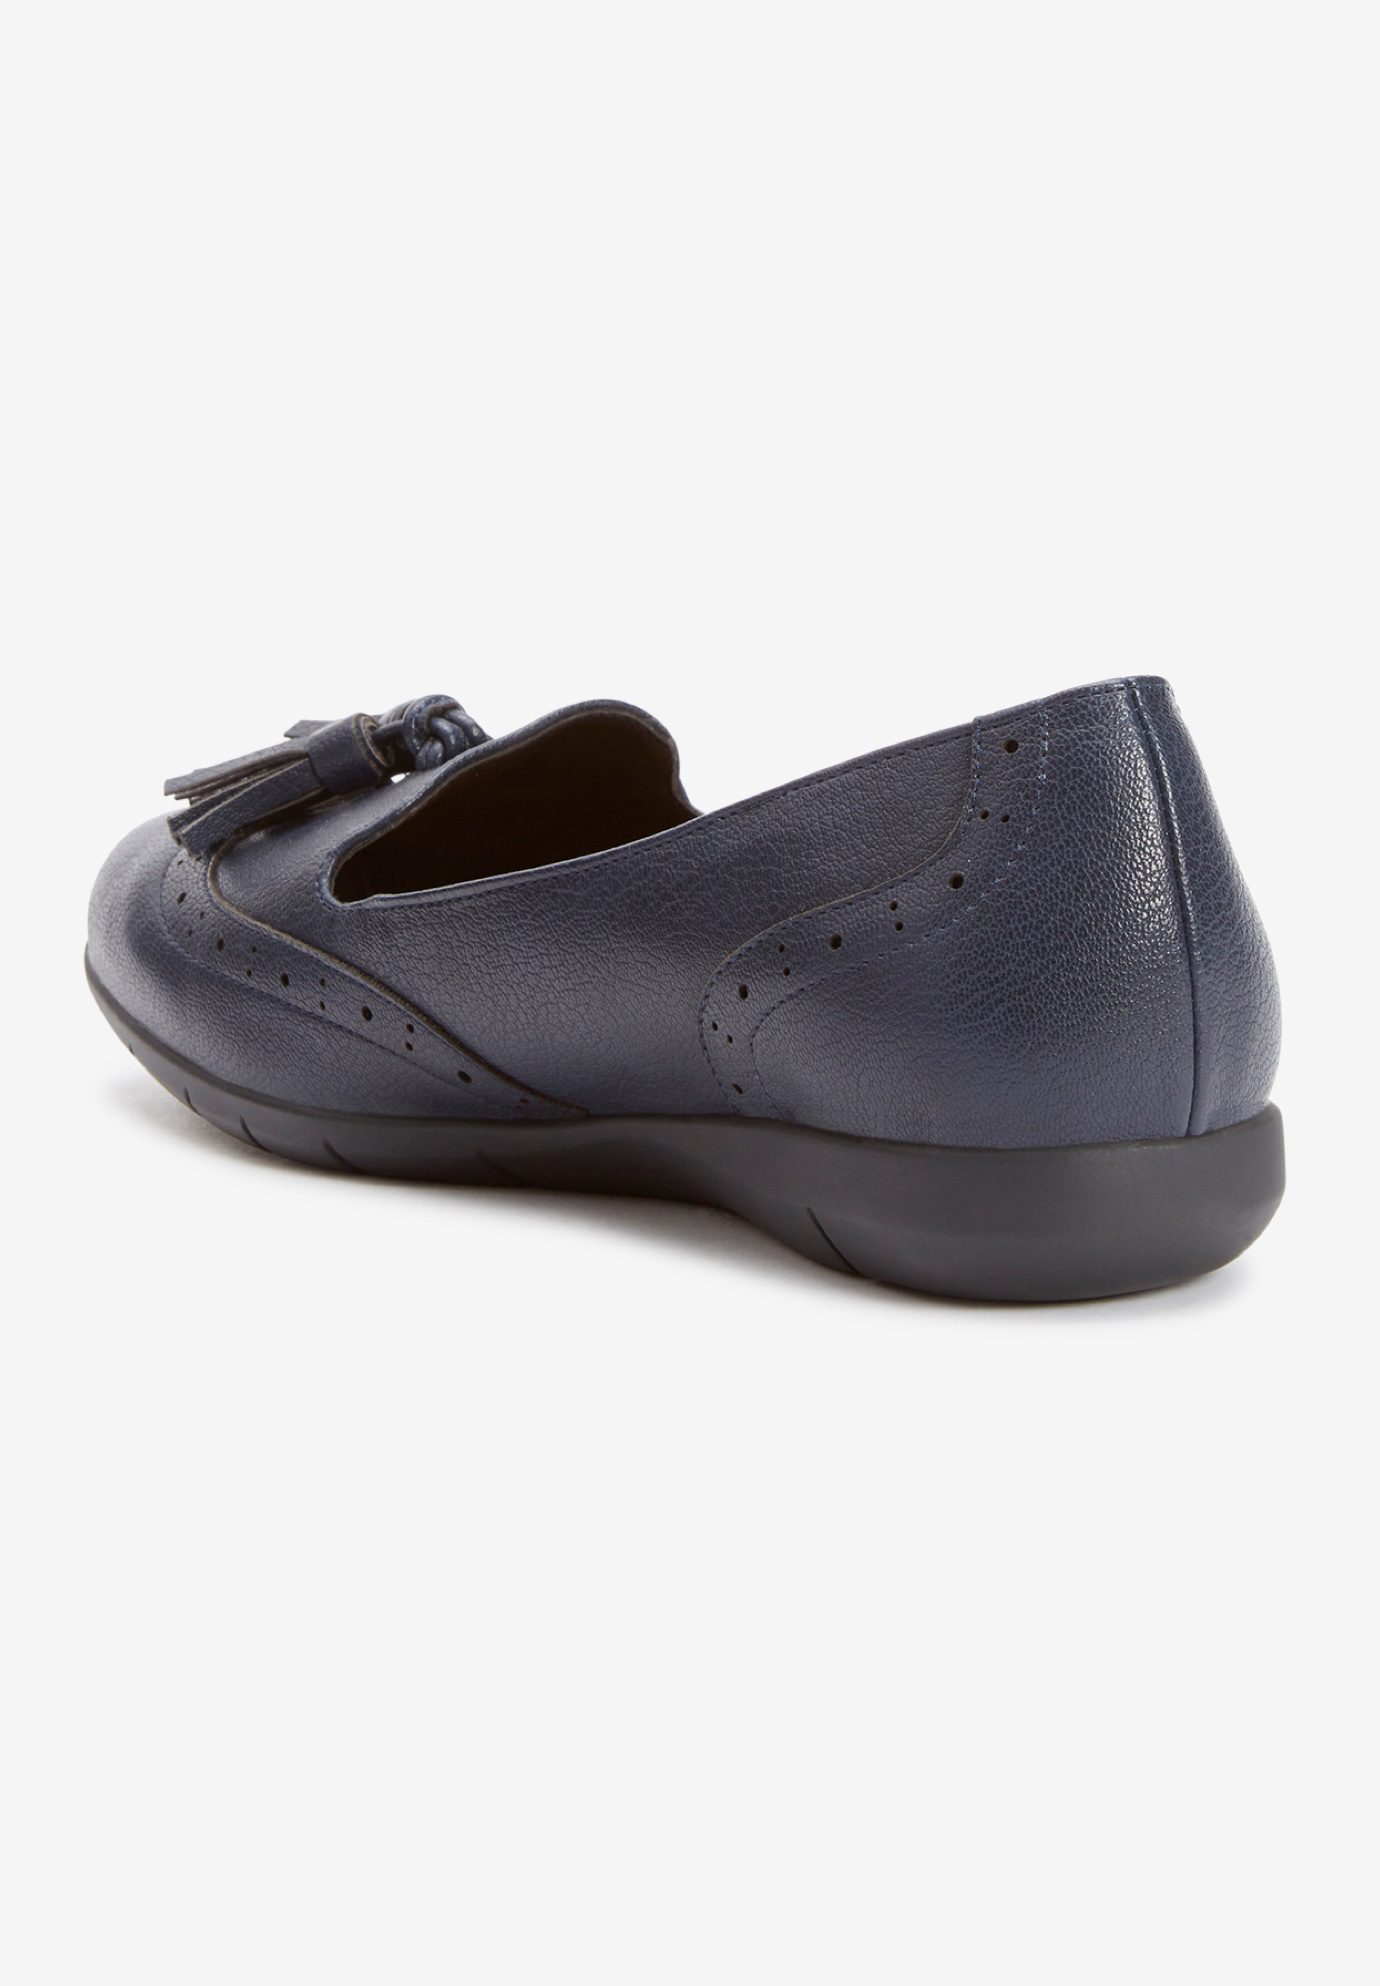 Comfortview Women's Wide Width The Aster Slip On Flat Shoes - image 3 of 7